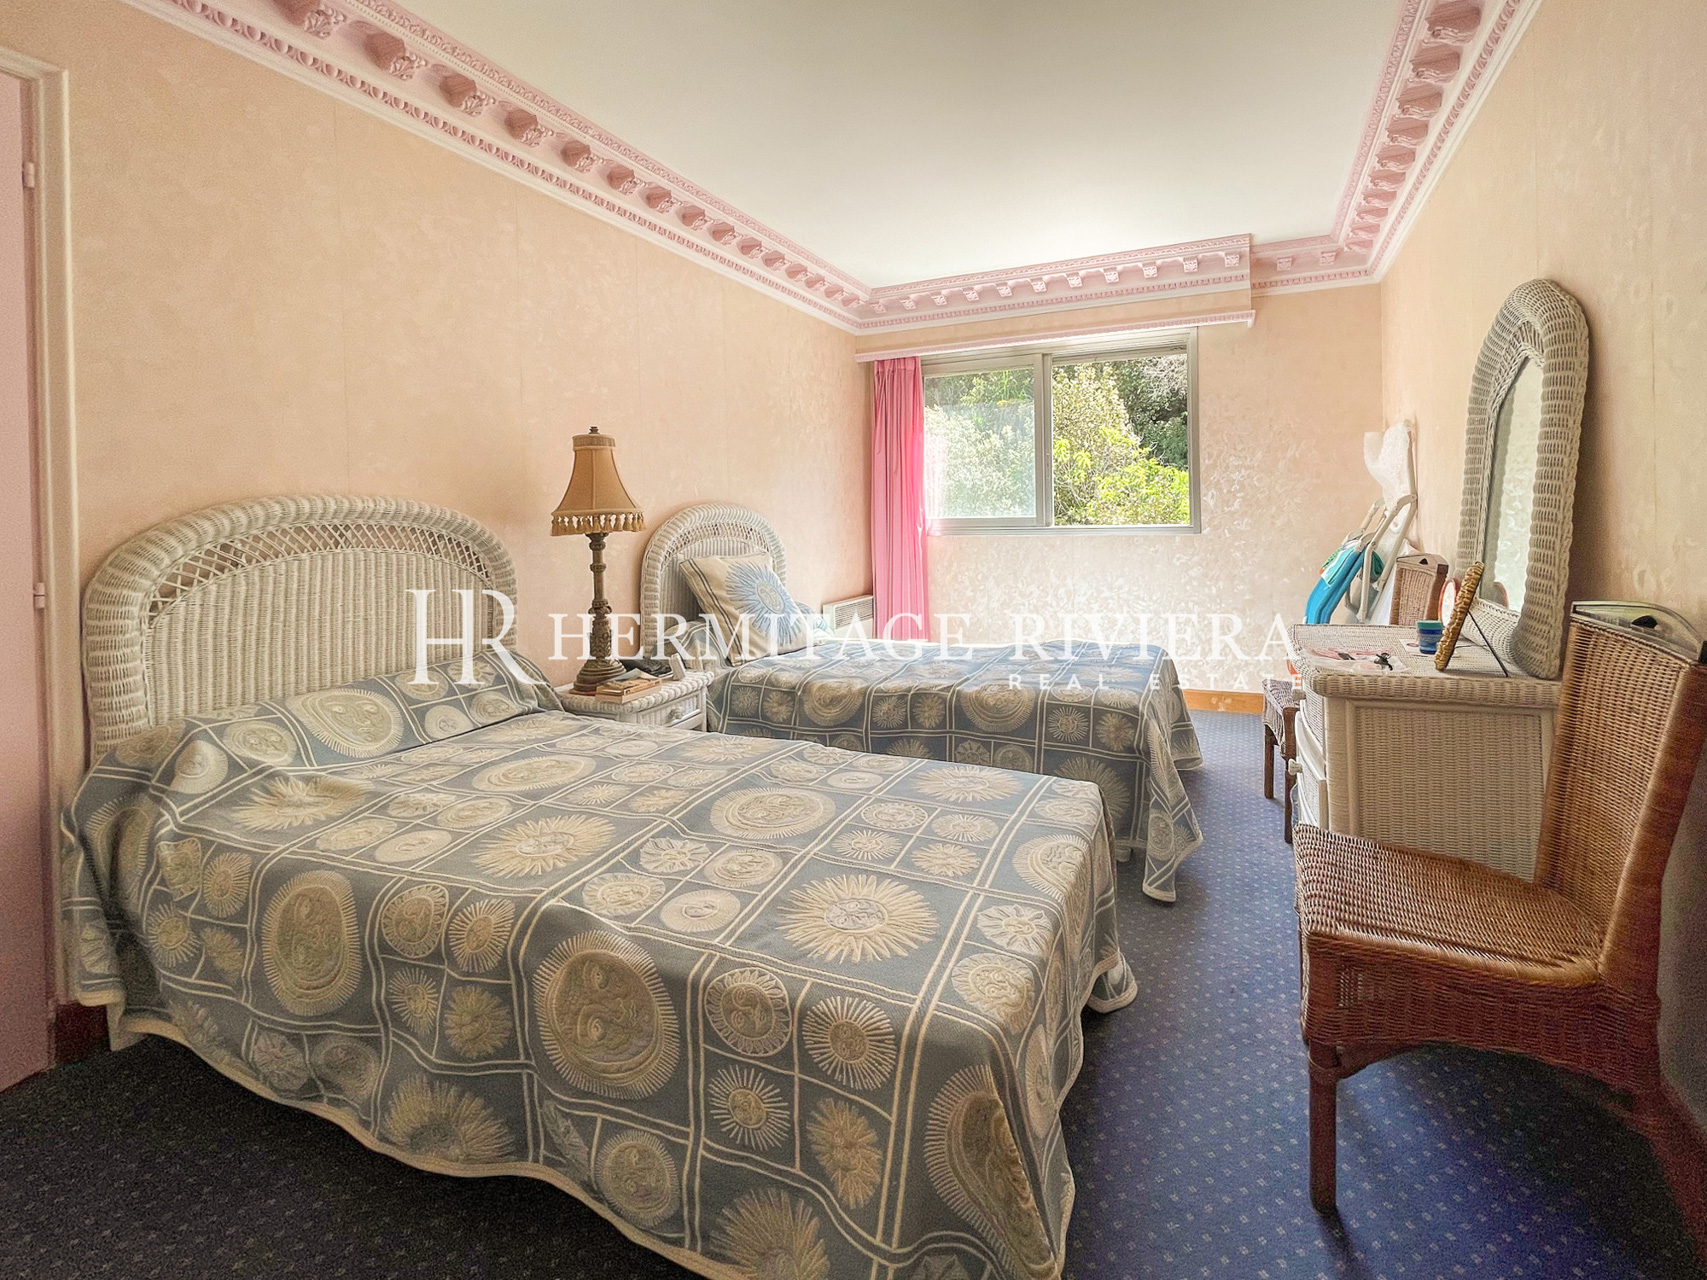 Top floor two bedroom apartment with views over Nice and the sea (image 16)